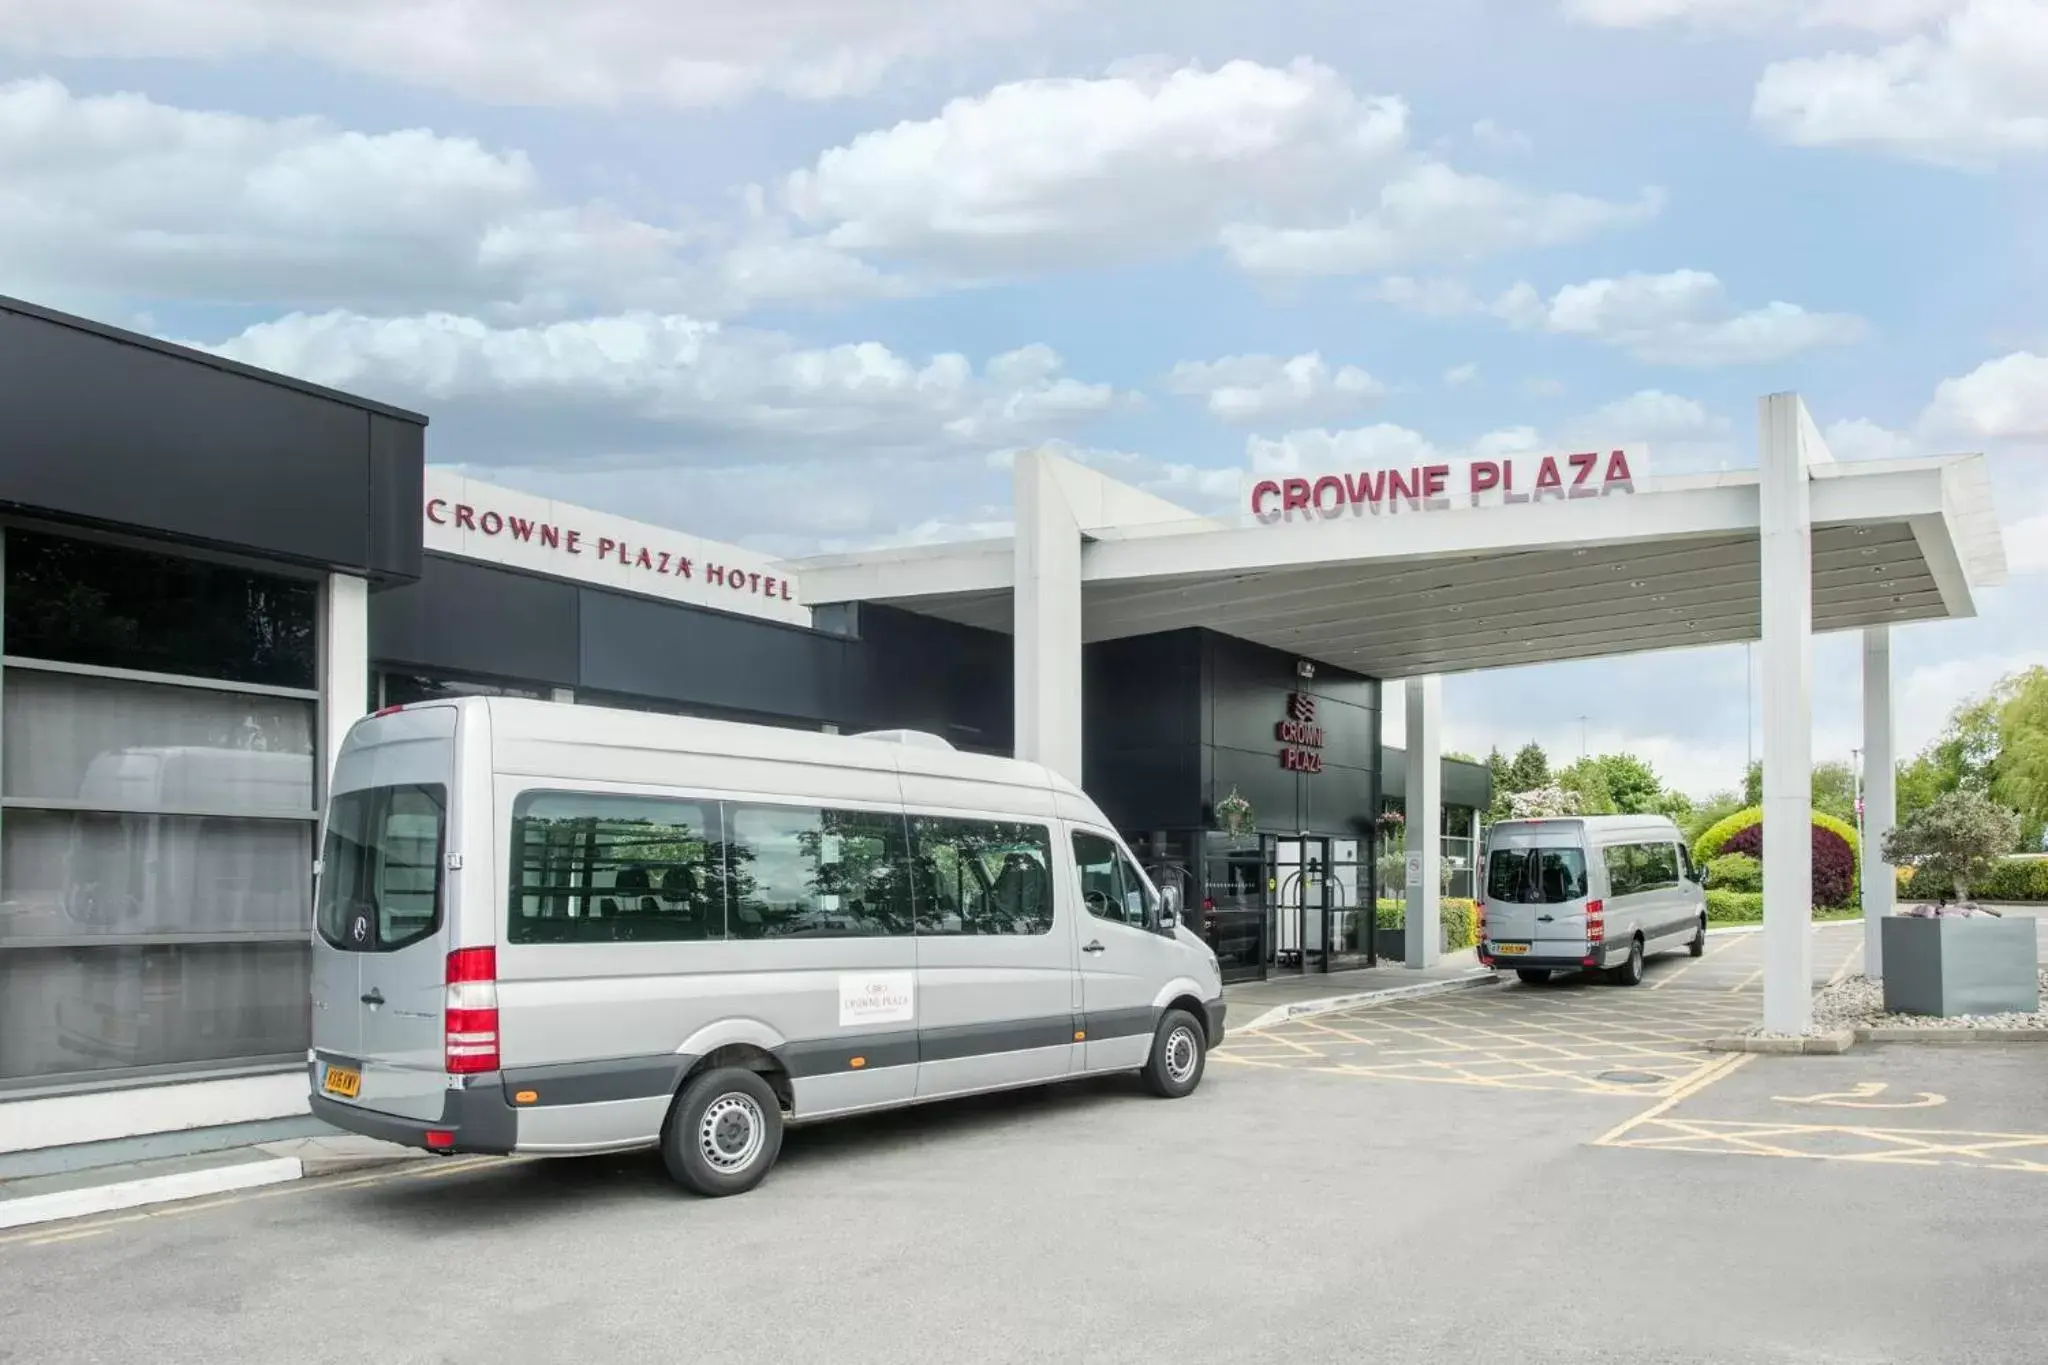 Property Building in Crowne Plaza Manchester Airport